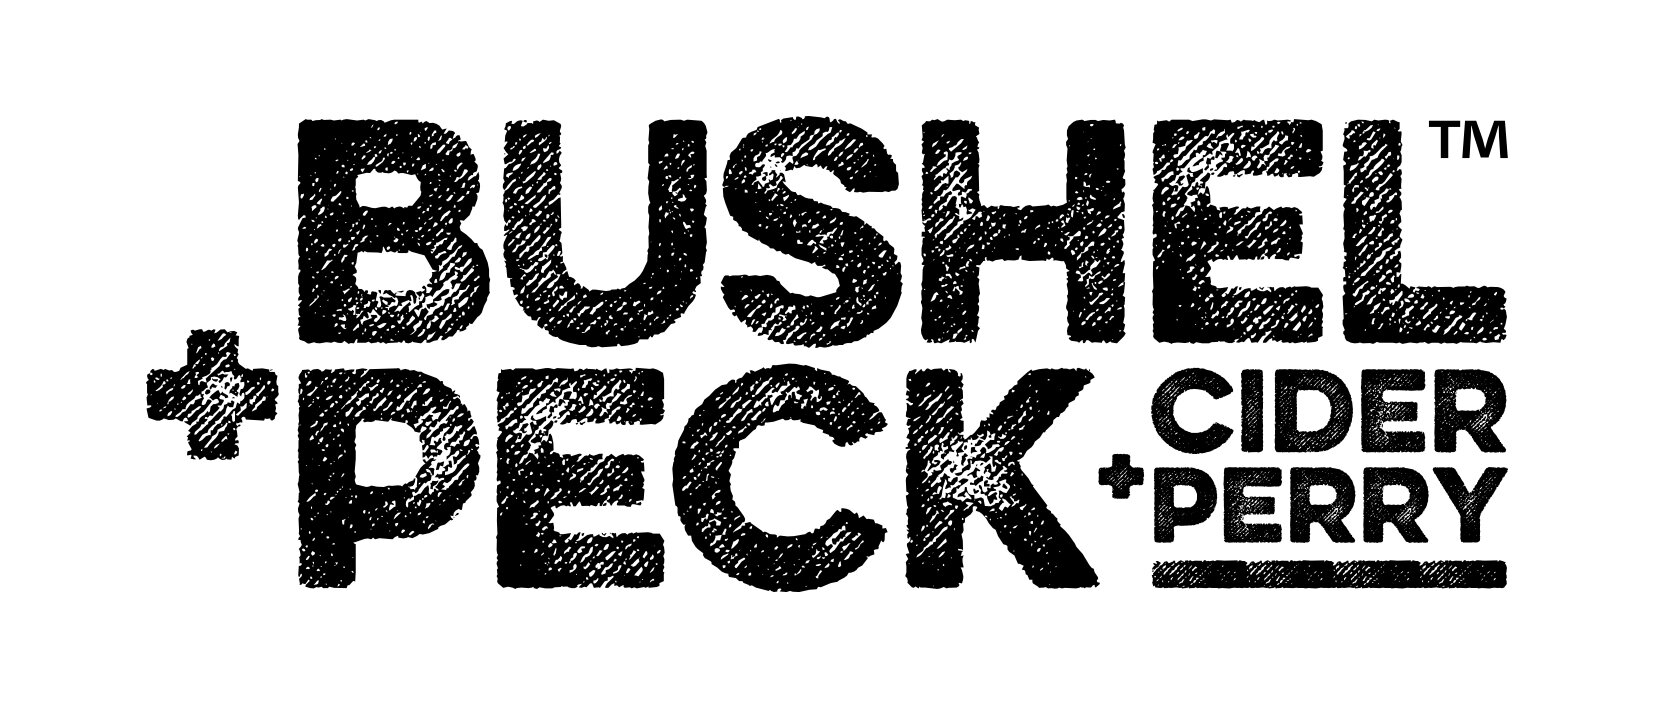 Bushel+Peck cider and perry